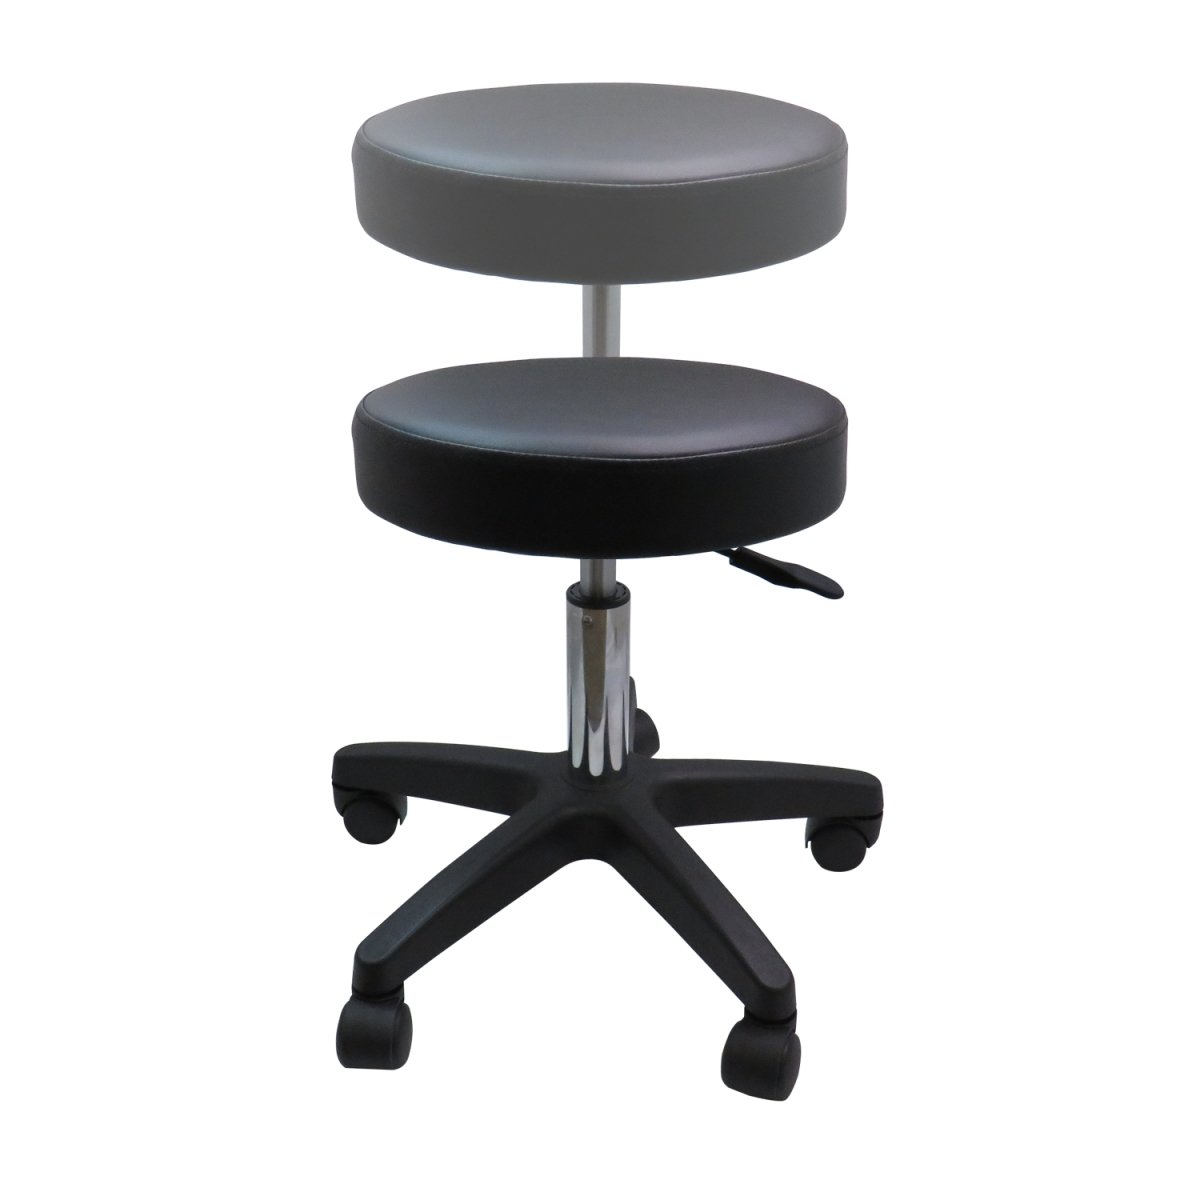 Choice Hydraulic Adjustable Height Rolling Stool - RS491/2 - GreenLife-Rolling Stool